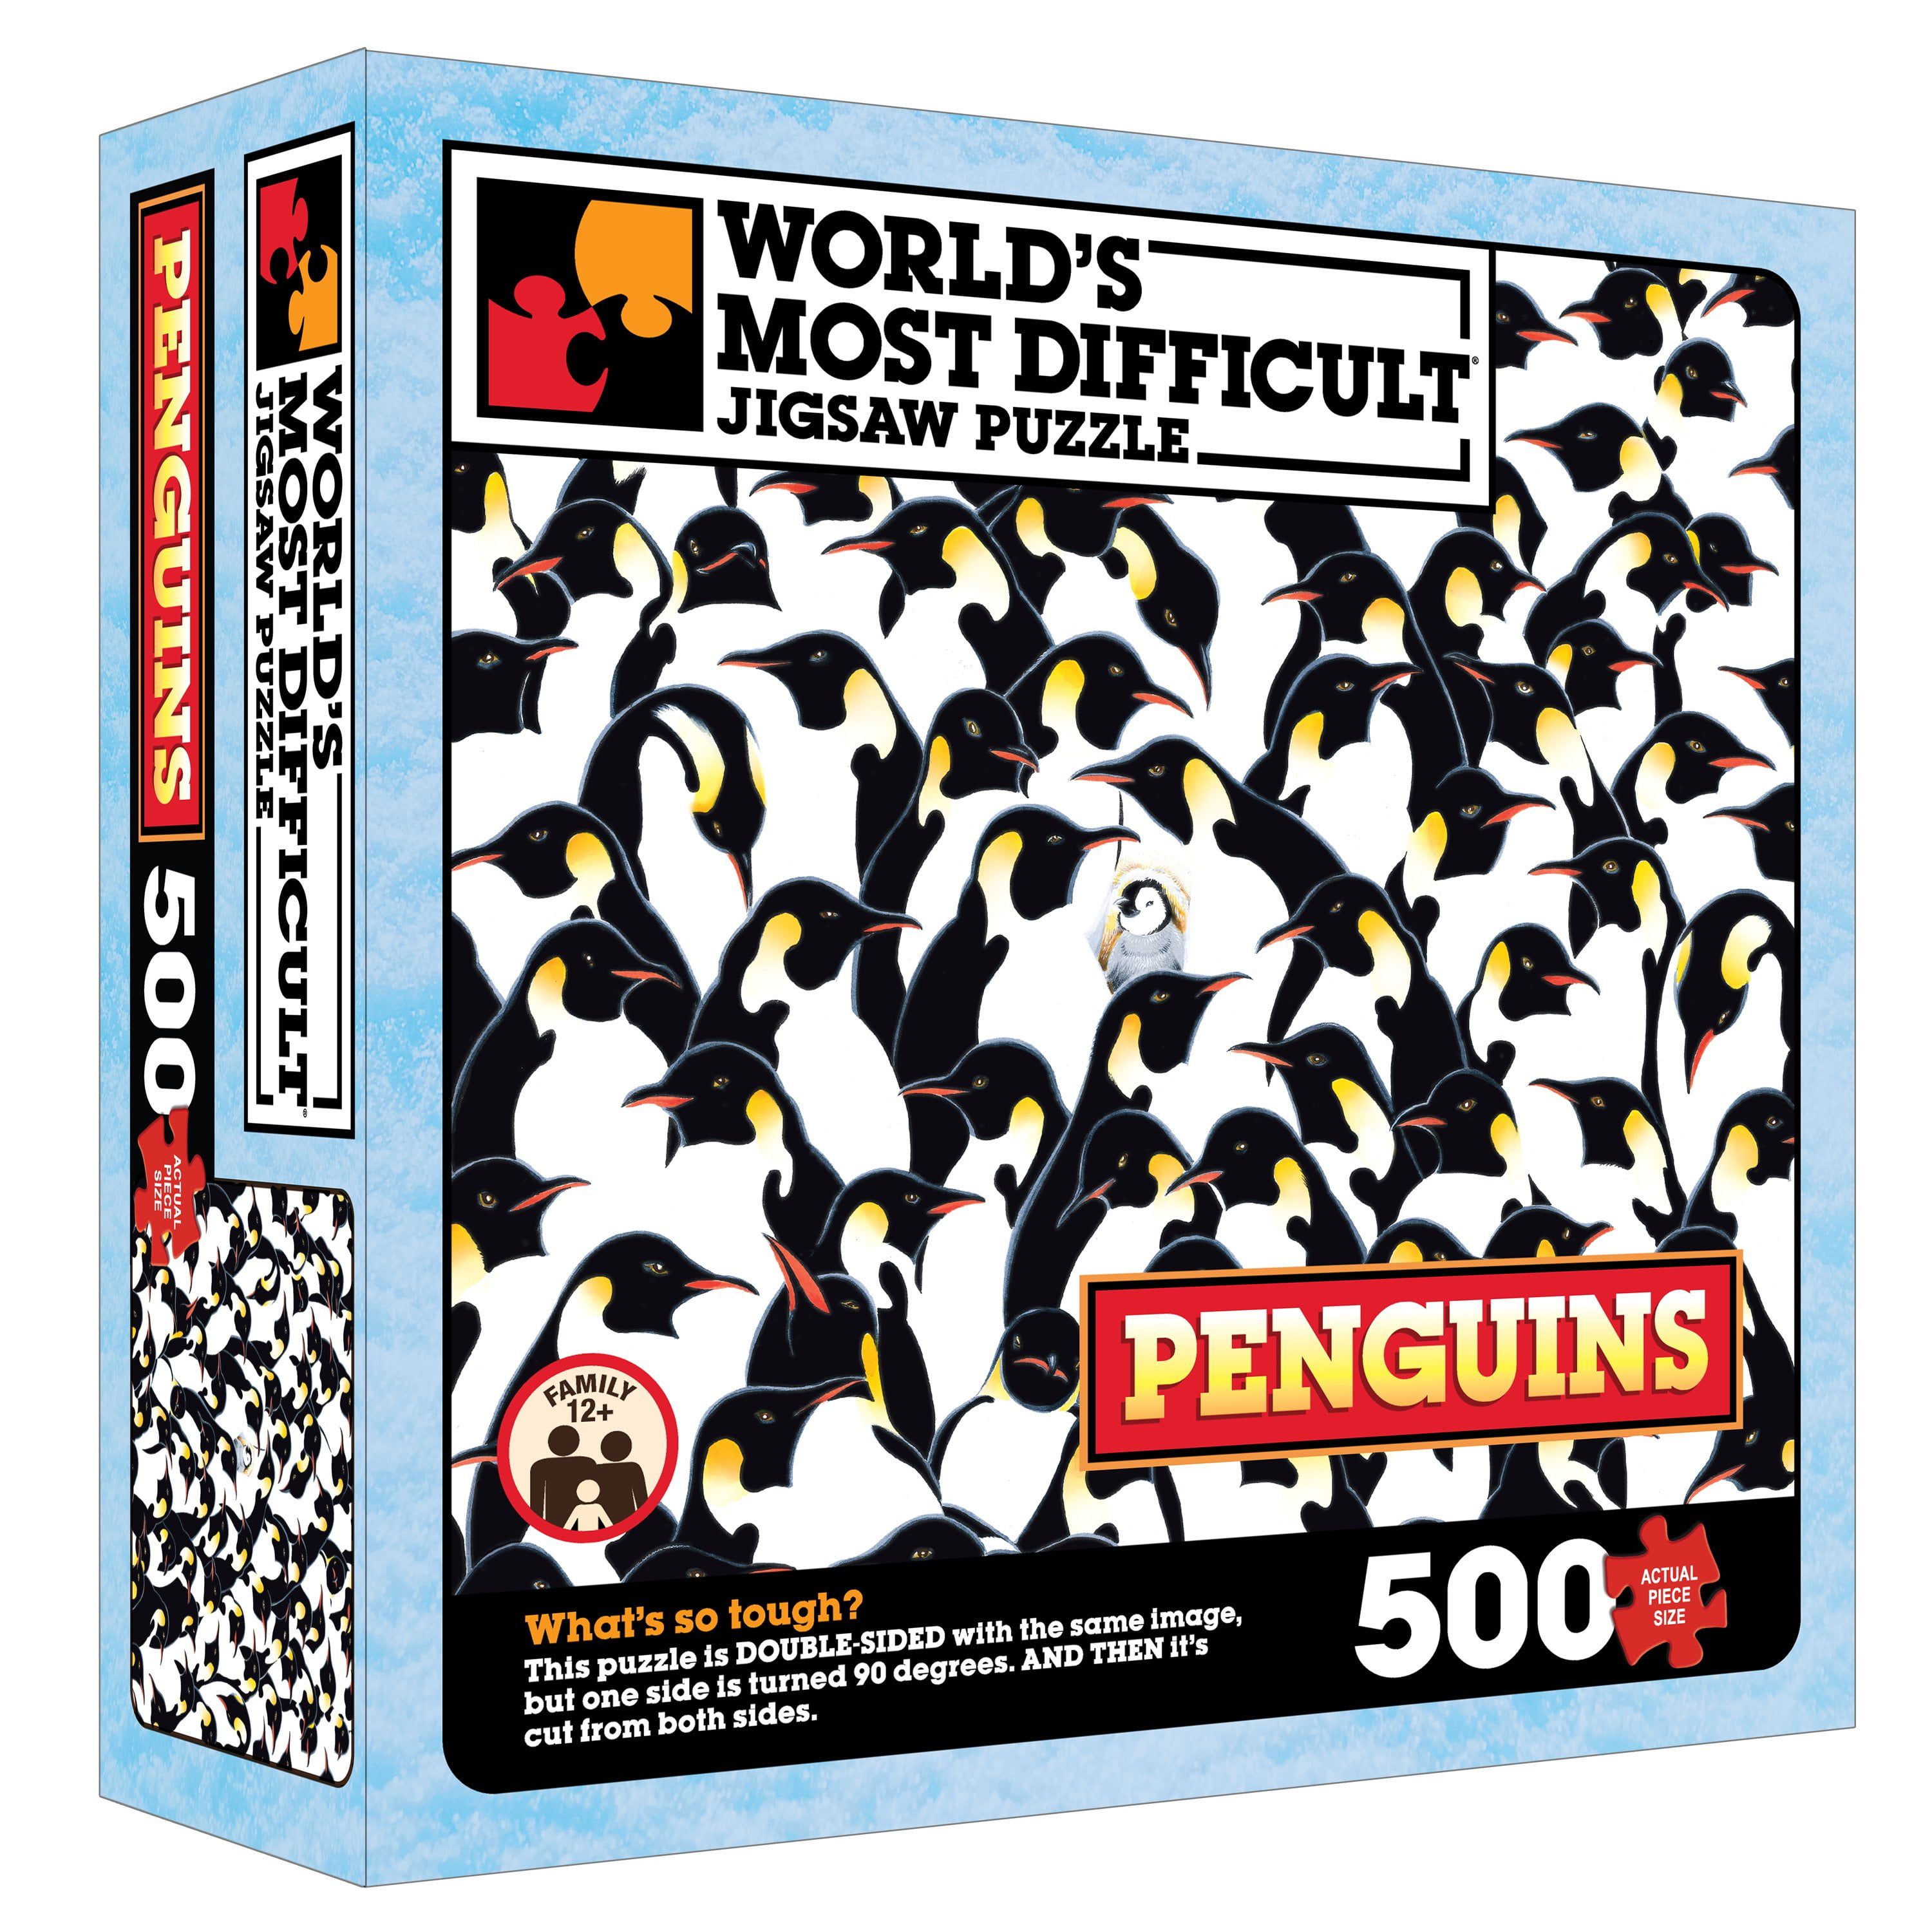 Tdc Games Worlds Most Difficult Jigsaw Puzzle Penguins 500 Pieces 15